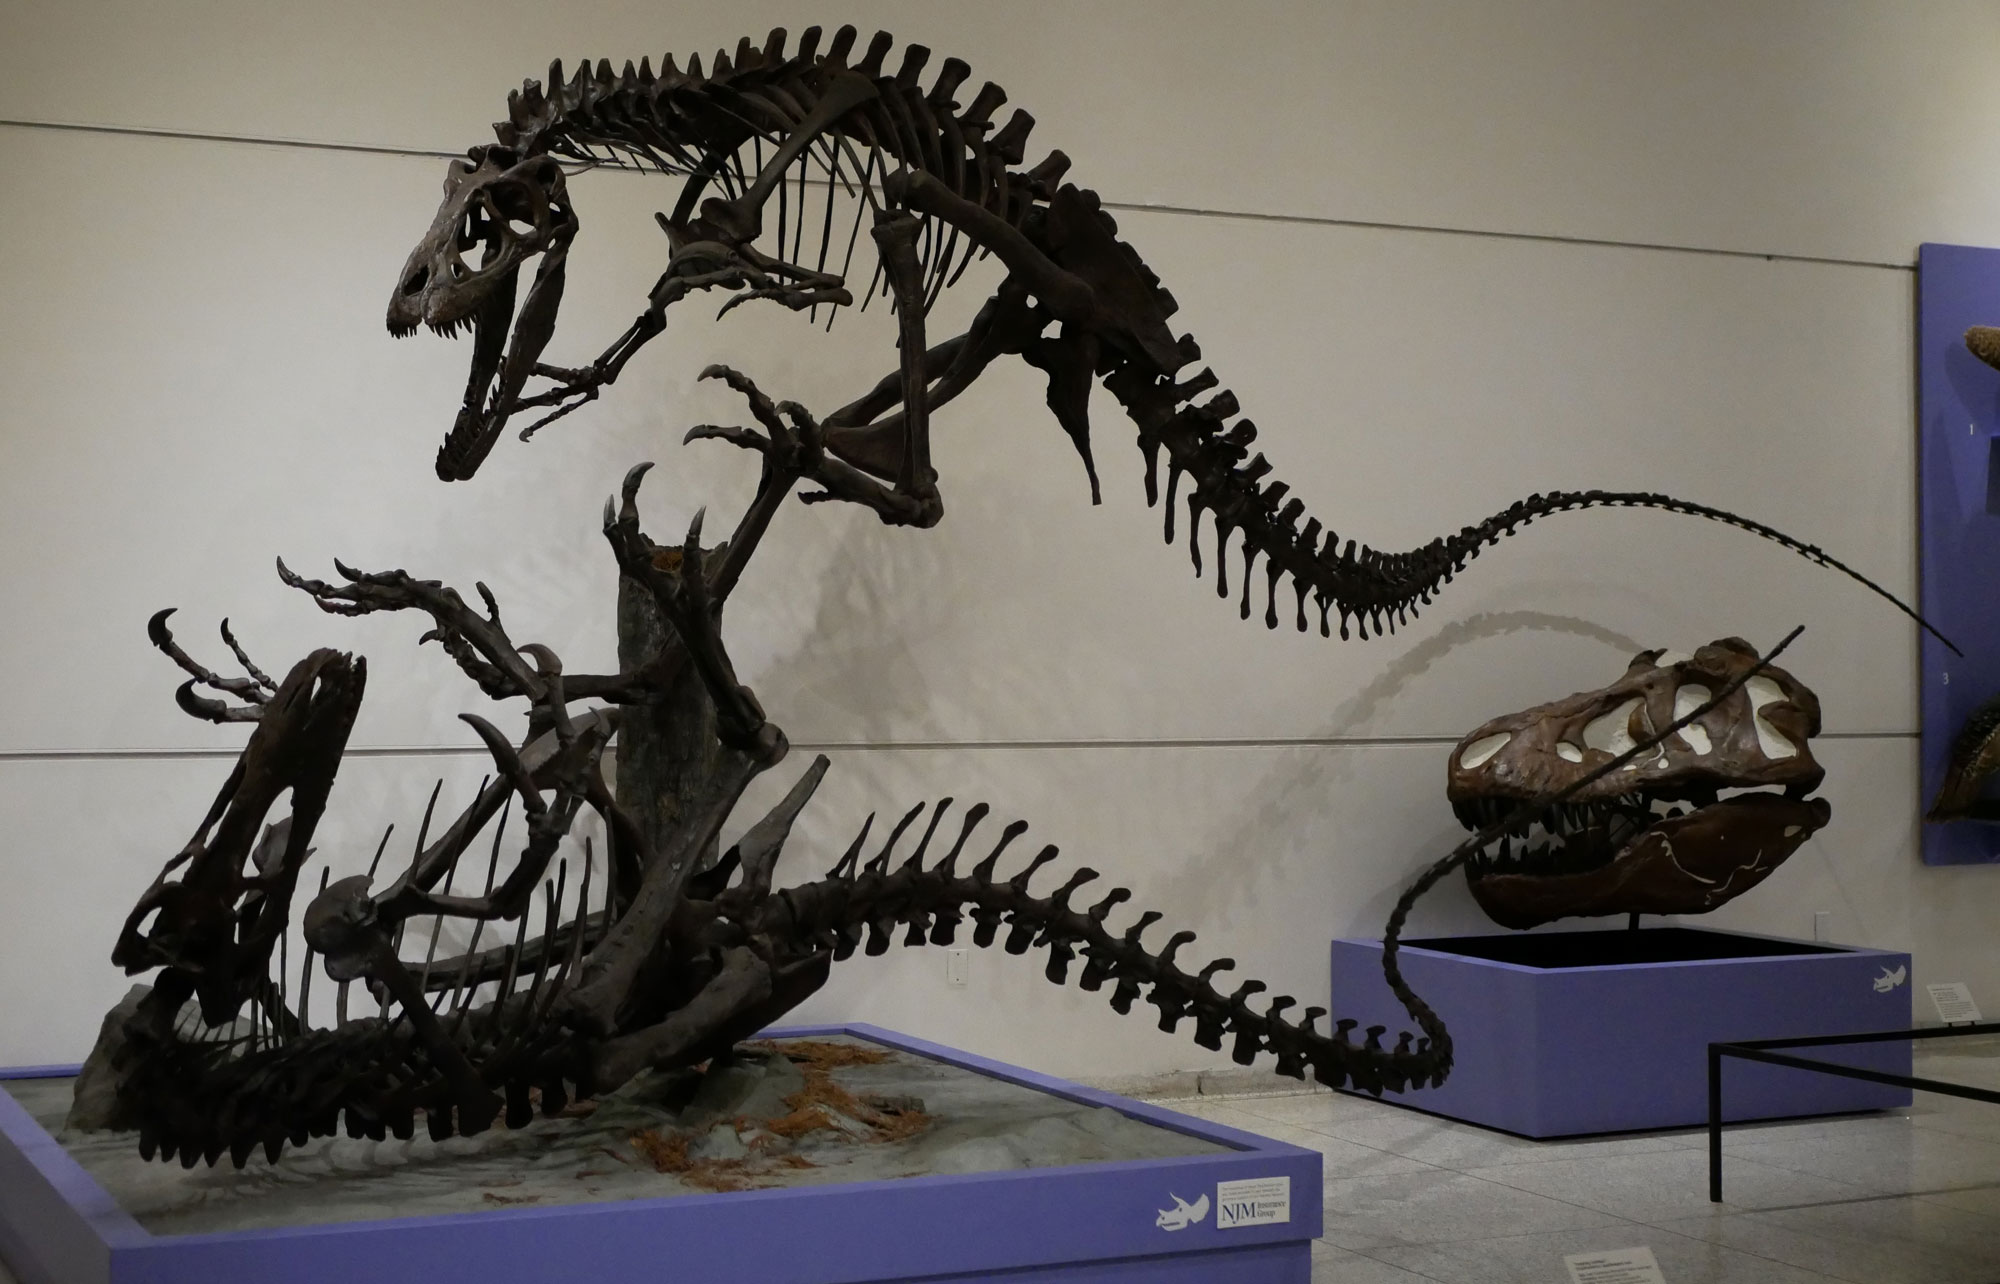 Photograph of a display of Dryptosaurus skeletons on display in New Jersey. The photo shows the mounted skeletons of two carnivorous dinosaurs. One is on its back with its arms and legs in the air in a defensive posture. The other is in the air, pouncing.